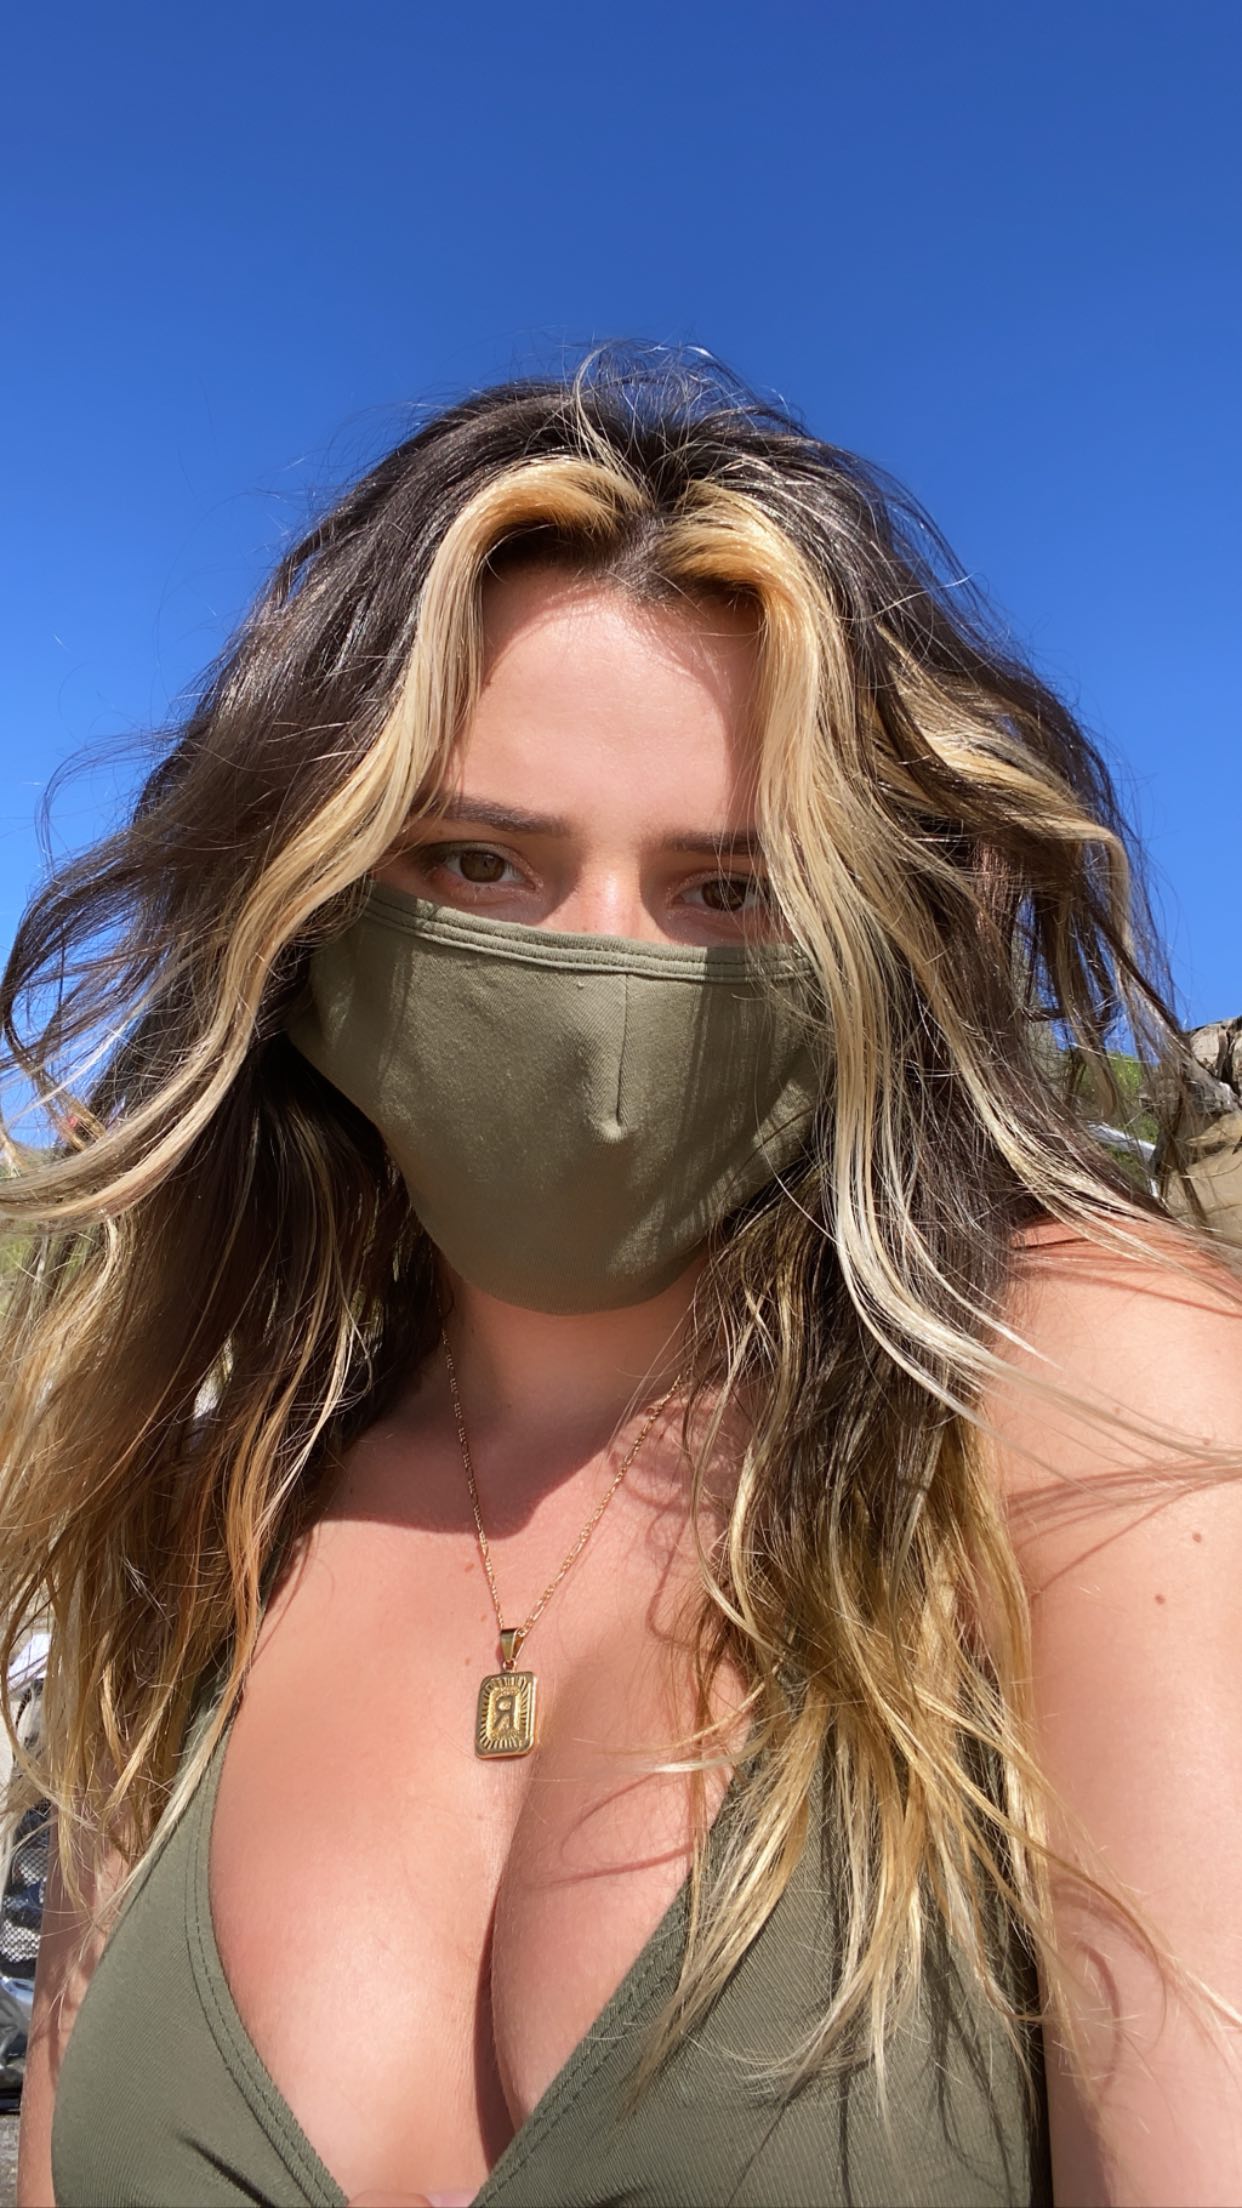 Bella Thorne Matches her Mask to her Bra!